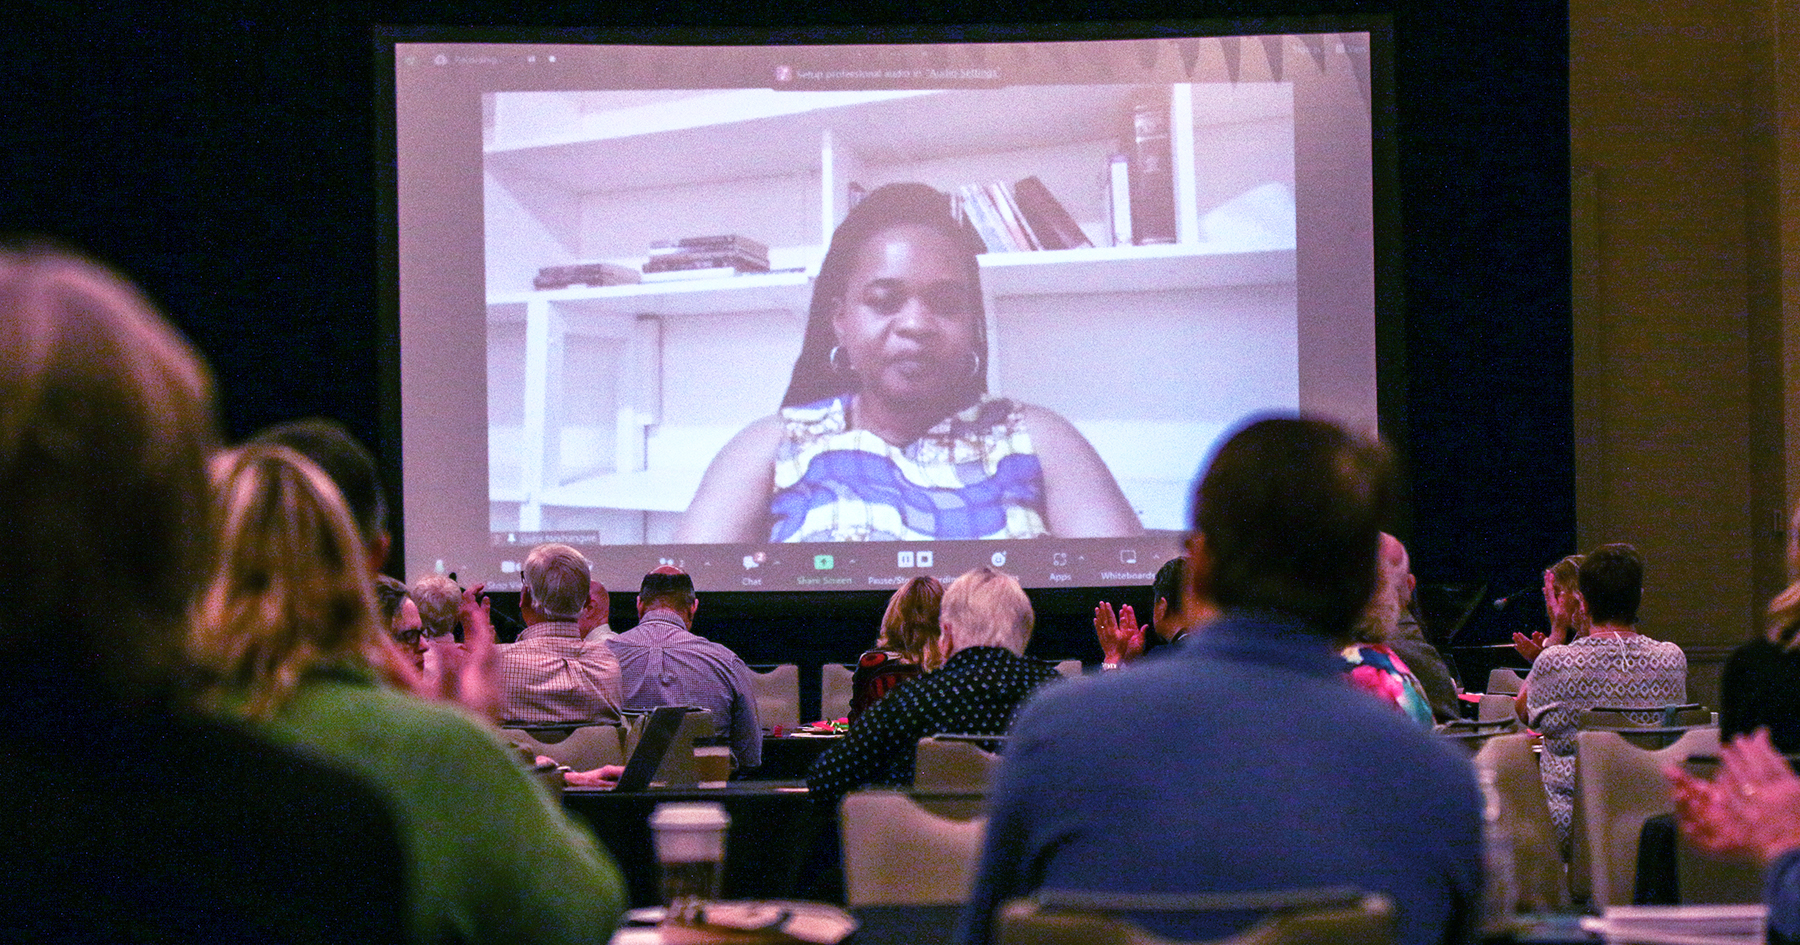 The Rev. Lydia Neshangwe spoke via Zoom to the Polity, Benefits and Mission Conference Thursday from her office in Zimbabwe. Photo by Randy Hobson.